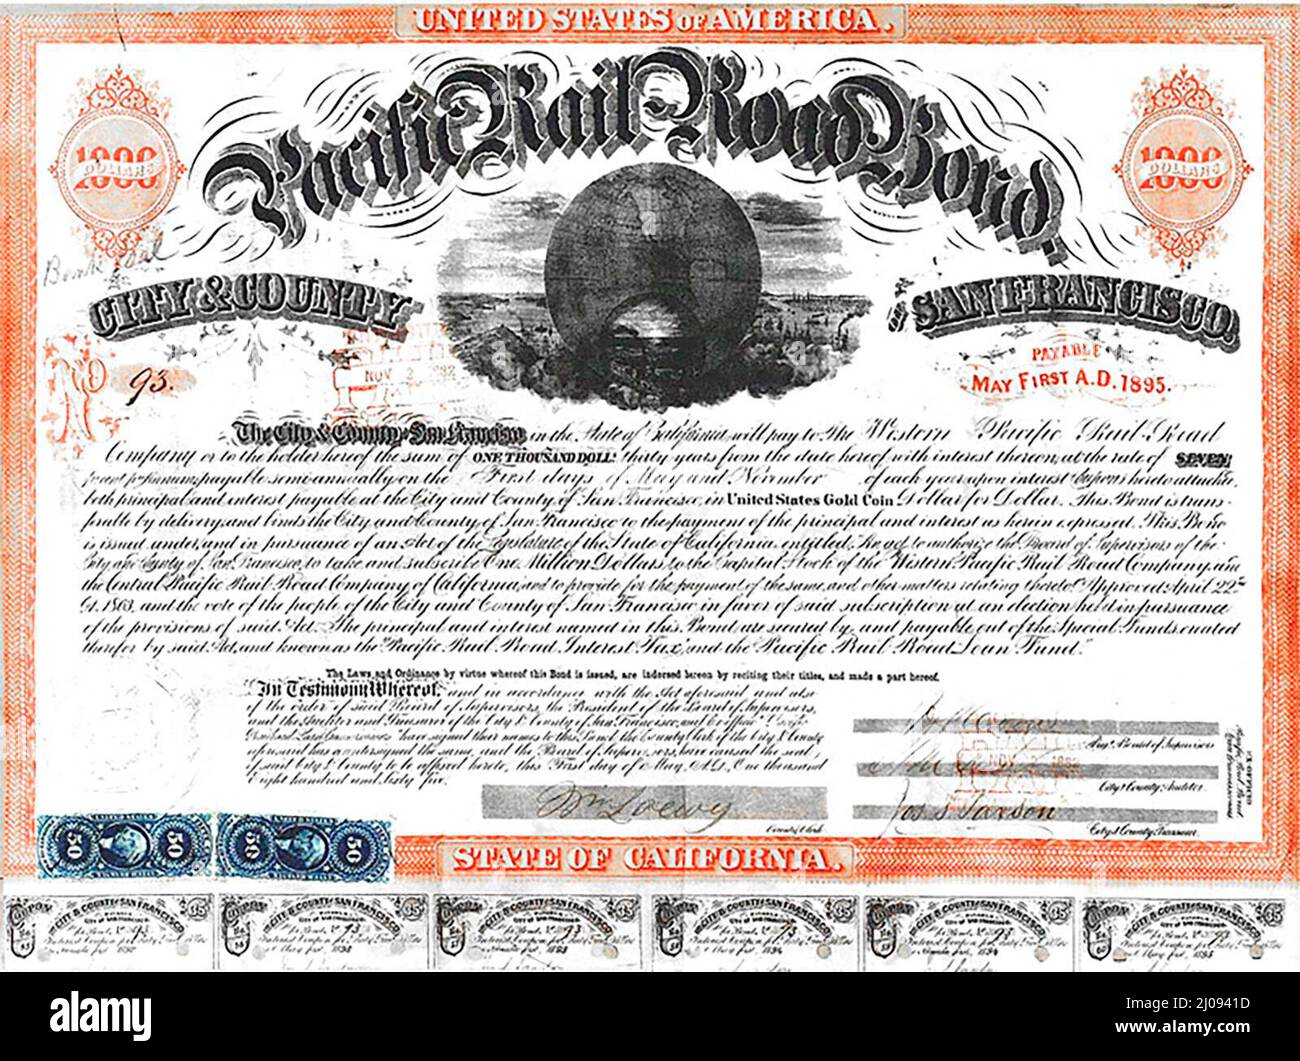 : $1,000 (30 year, 7%) 'Pacific Railroad Bond' (#93 of 200) issued by the City and County of San Francisco under 'An Act to Authorize the Board of Supervisors of the City and County of San Francisco to take and subscribe One Million Dollars to the Capital Stock of the Western Pacific Rail Road Company and the Central Pacific Rail Road Company of California and to provide for the payment of the same and other matters relating thereto' approved on April 22, 1863, as amended by section Five of the 'Compromise Act' approved on April 4, 1864, to fund the construction of the Western Pacific Railroad Stock Photo